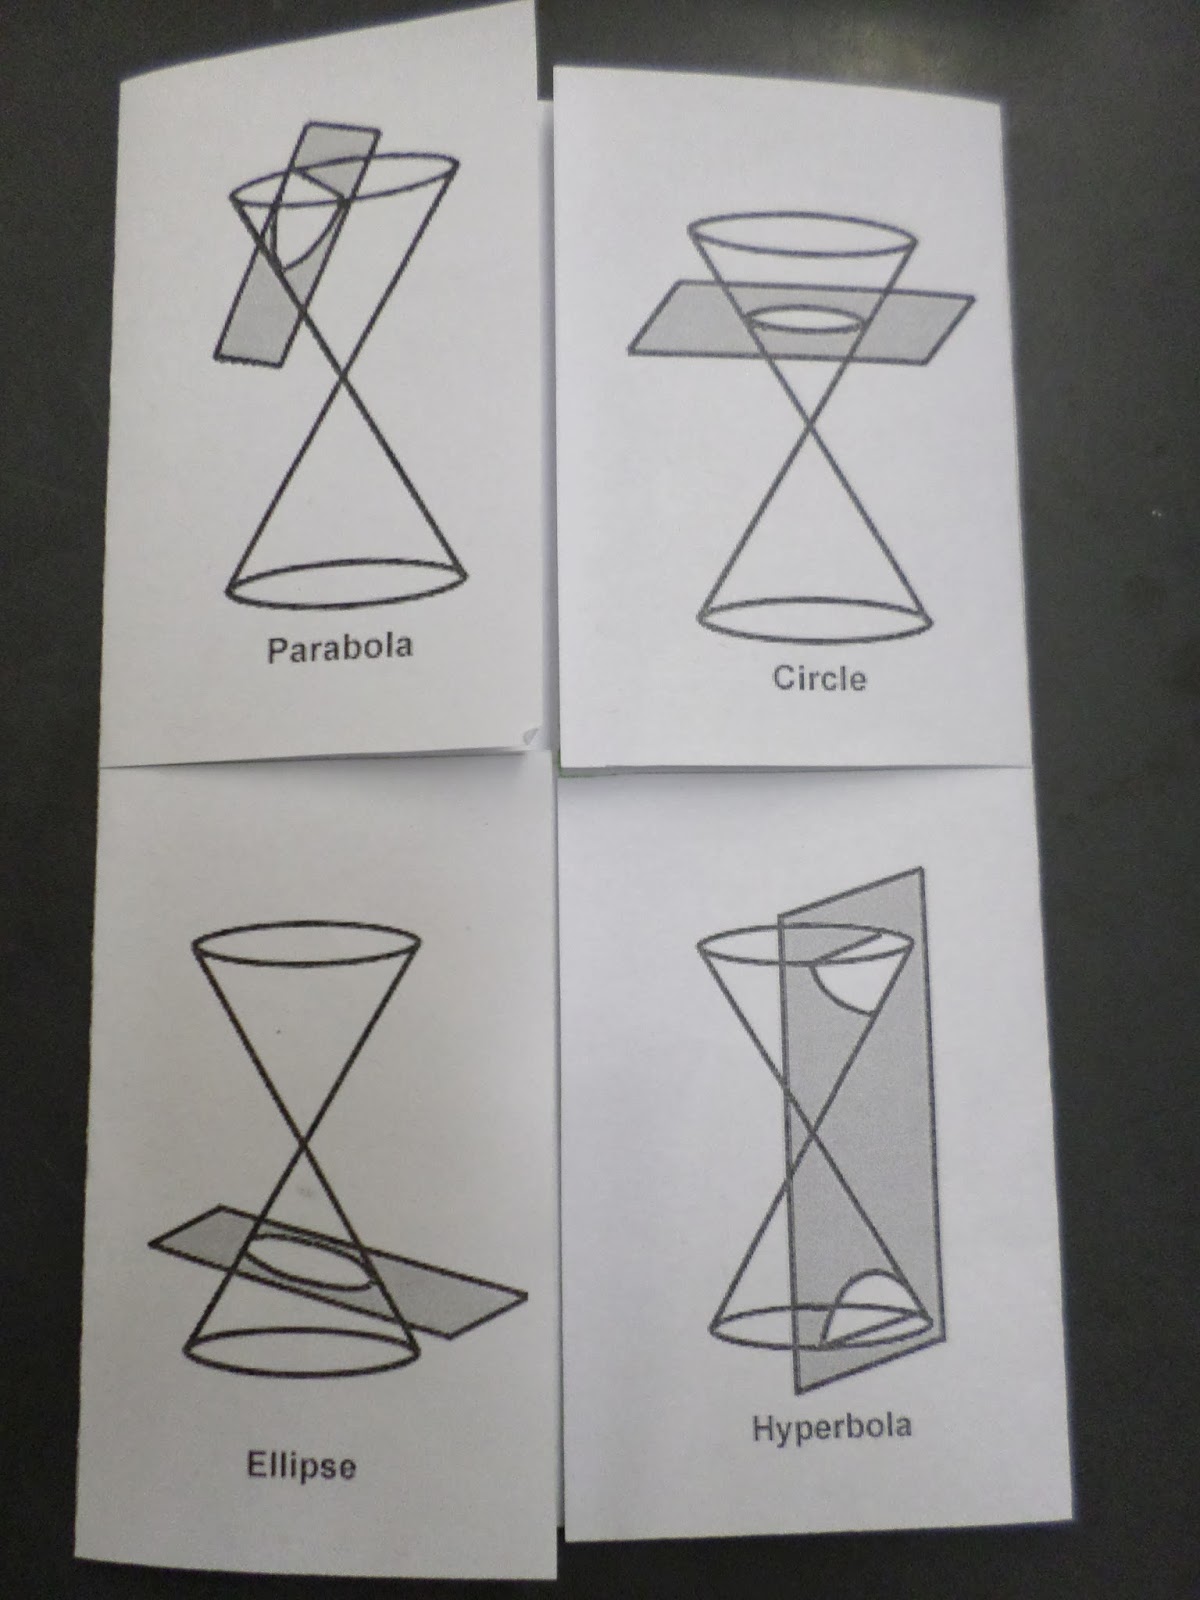 Conic Sections Foldable for Algebra 2 or Pre-Calculus Interactive Notebook Page on Conics